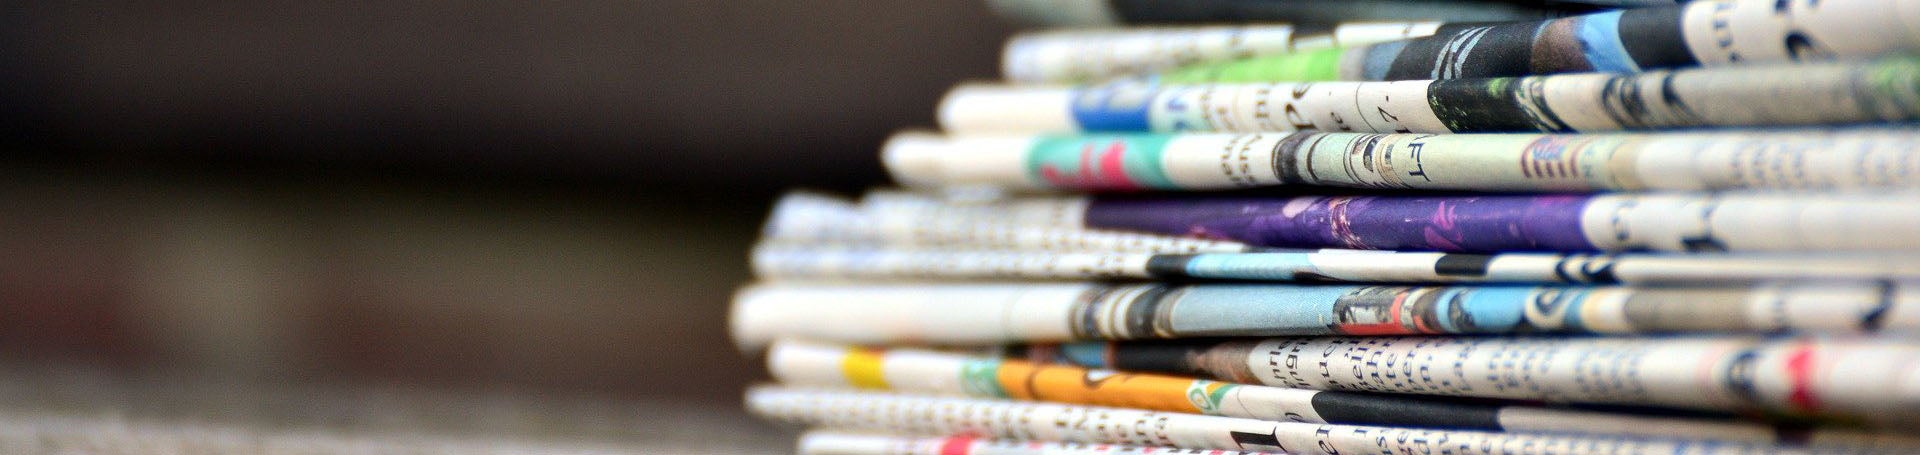 Pile of newspapers (c) Pixabay free stock images